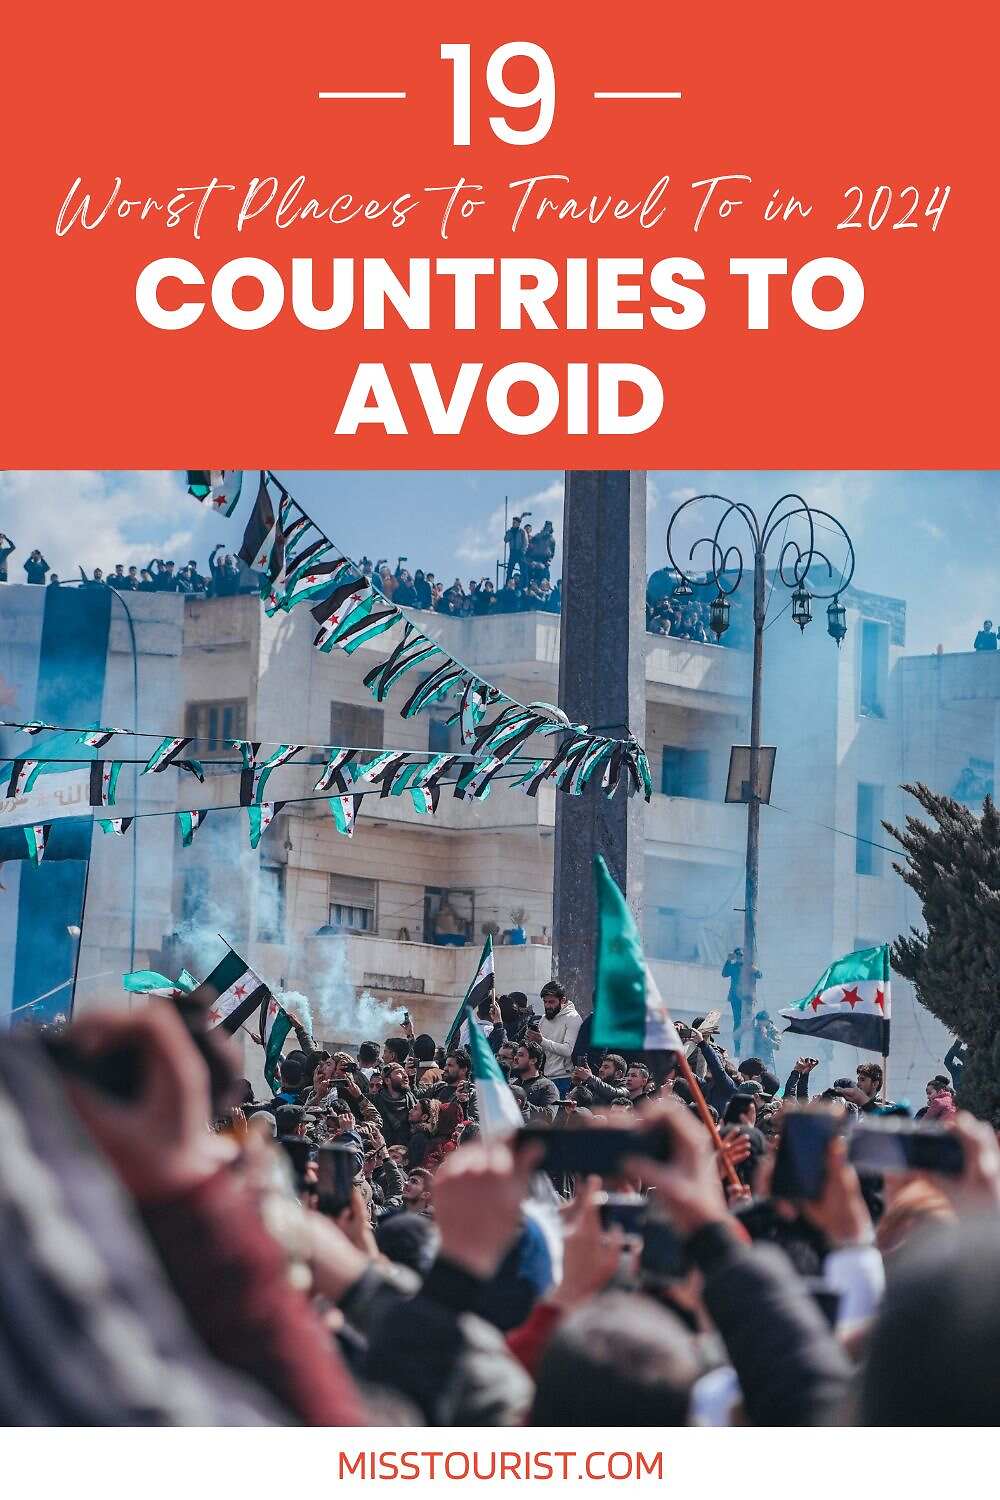 Image of a crowded street scene with many people holding up flags. The text overlay reads "19 Worst Places To Travel To in 2024: Countries to Avoid," attributed to MissTourist.